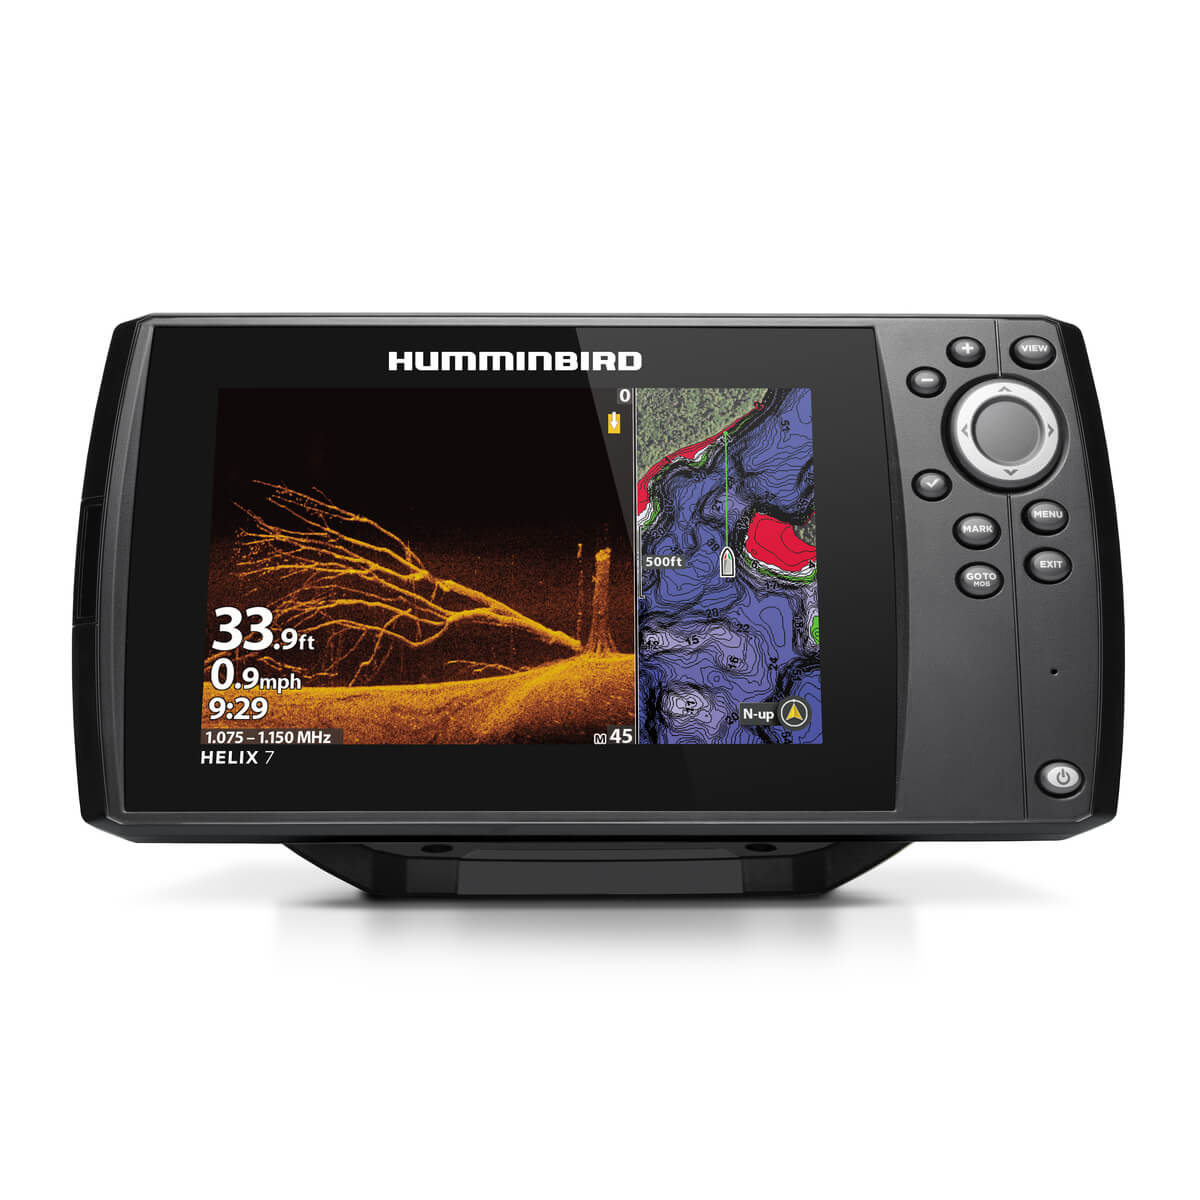 Humminbird is the best gps for fishing